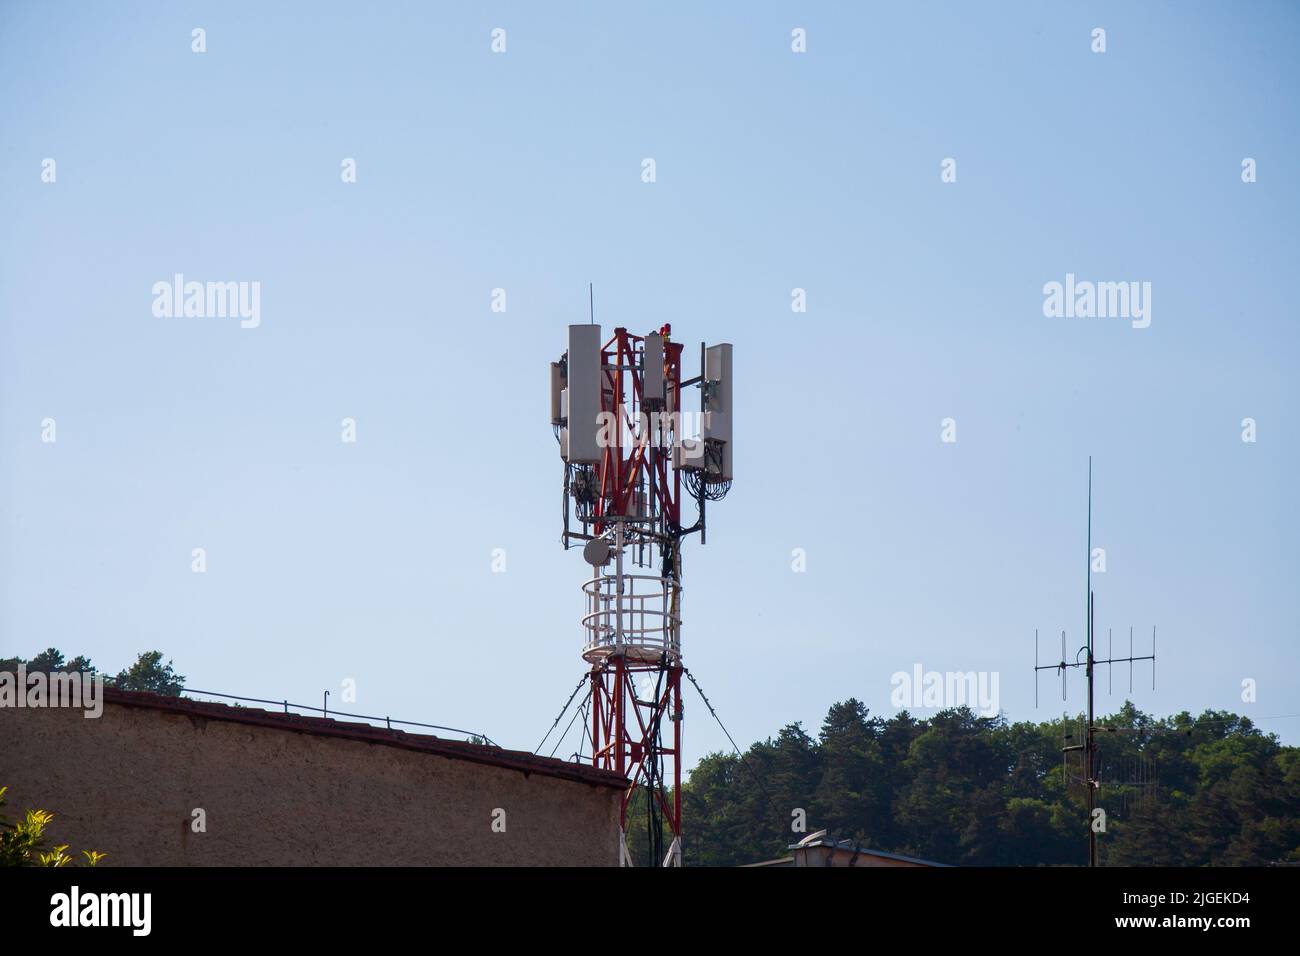 Telecommunication tower with 5G cellular network antenna Stock Photo